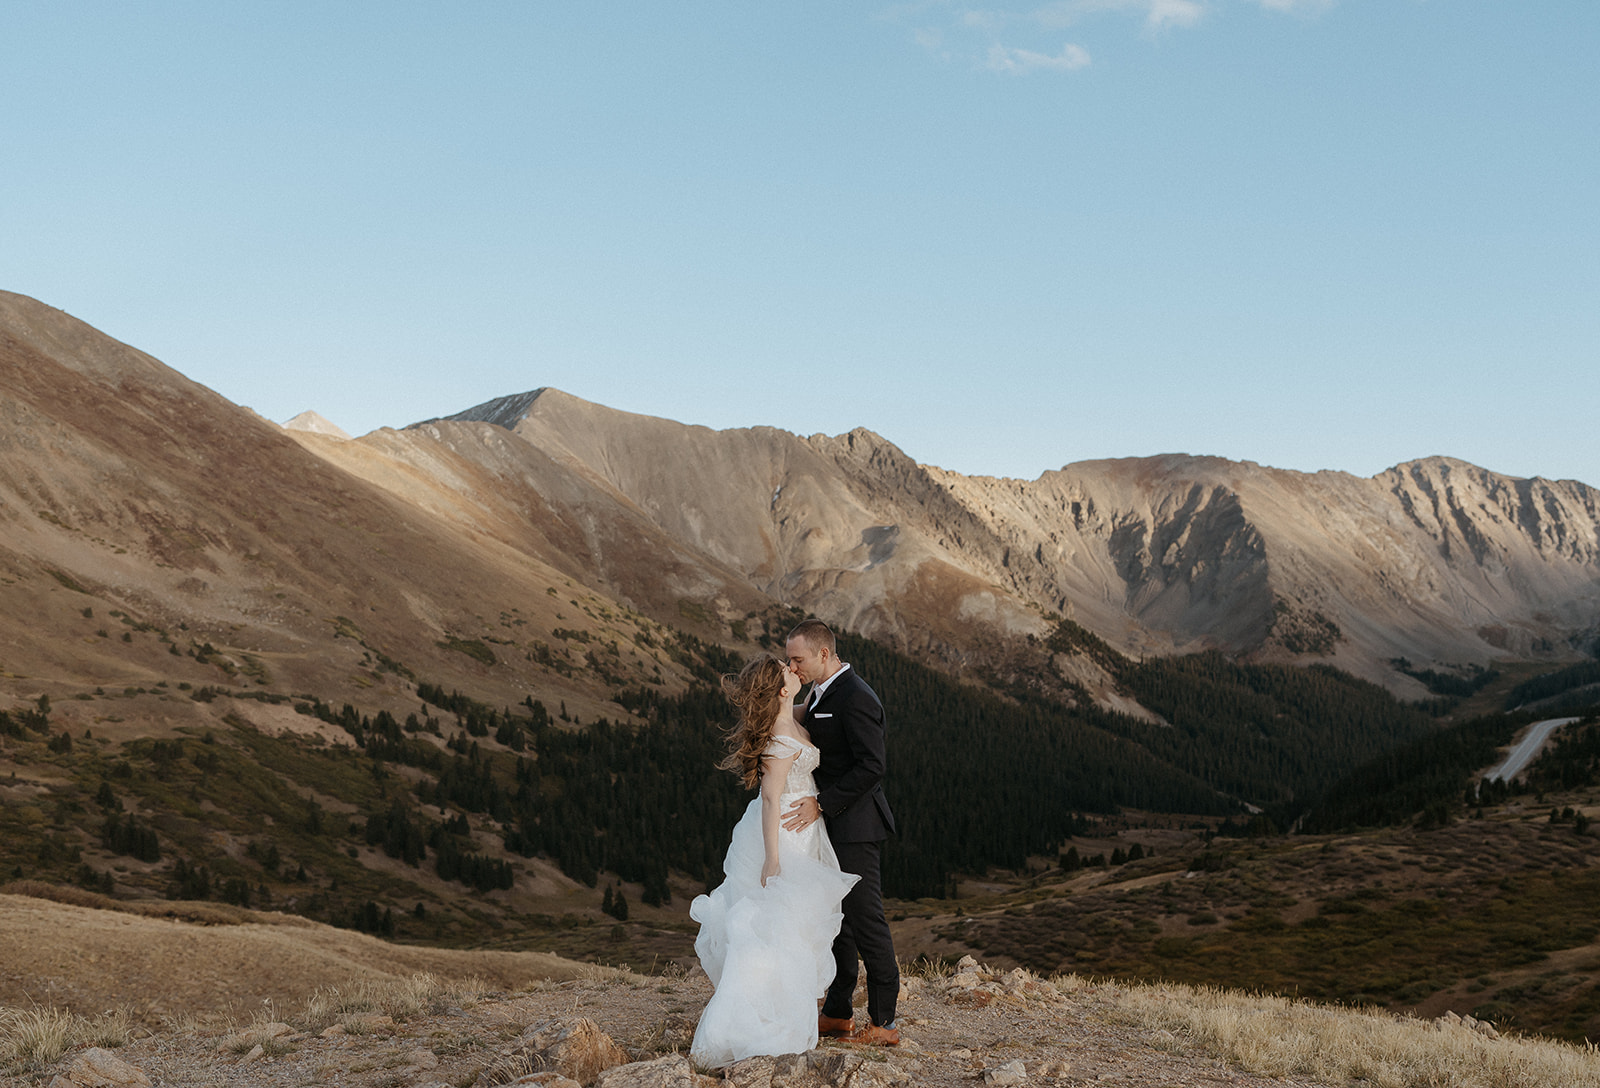 Newlyweds kiss on the edge of a mountain at sunset in a lace dress and black suit